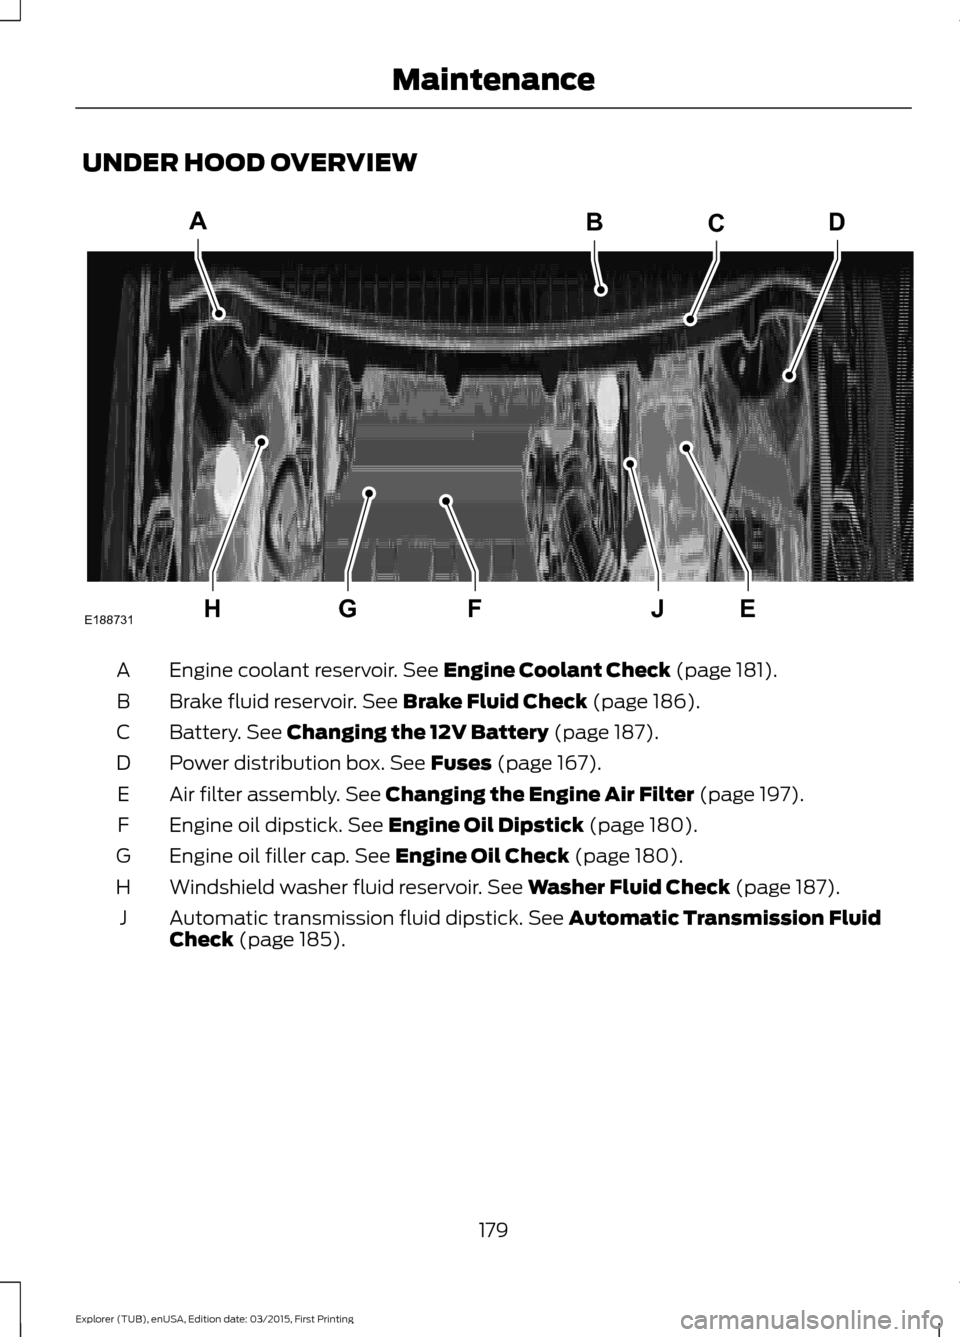 FORD POLICE INTERCEPTOR UTILITY 2016 1.G Owners Manual UNDER HOOD OVERVIEW
Engine coolant reservoir. See Engine Coolant Check (page 181).
A
Brake fluid reservoir.
 See Brake Fluid Check (page 186).
B
Battery.
 See Changing the 12V Battery (page 187).
C
Po